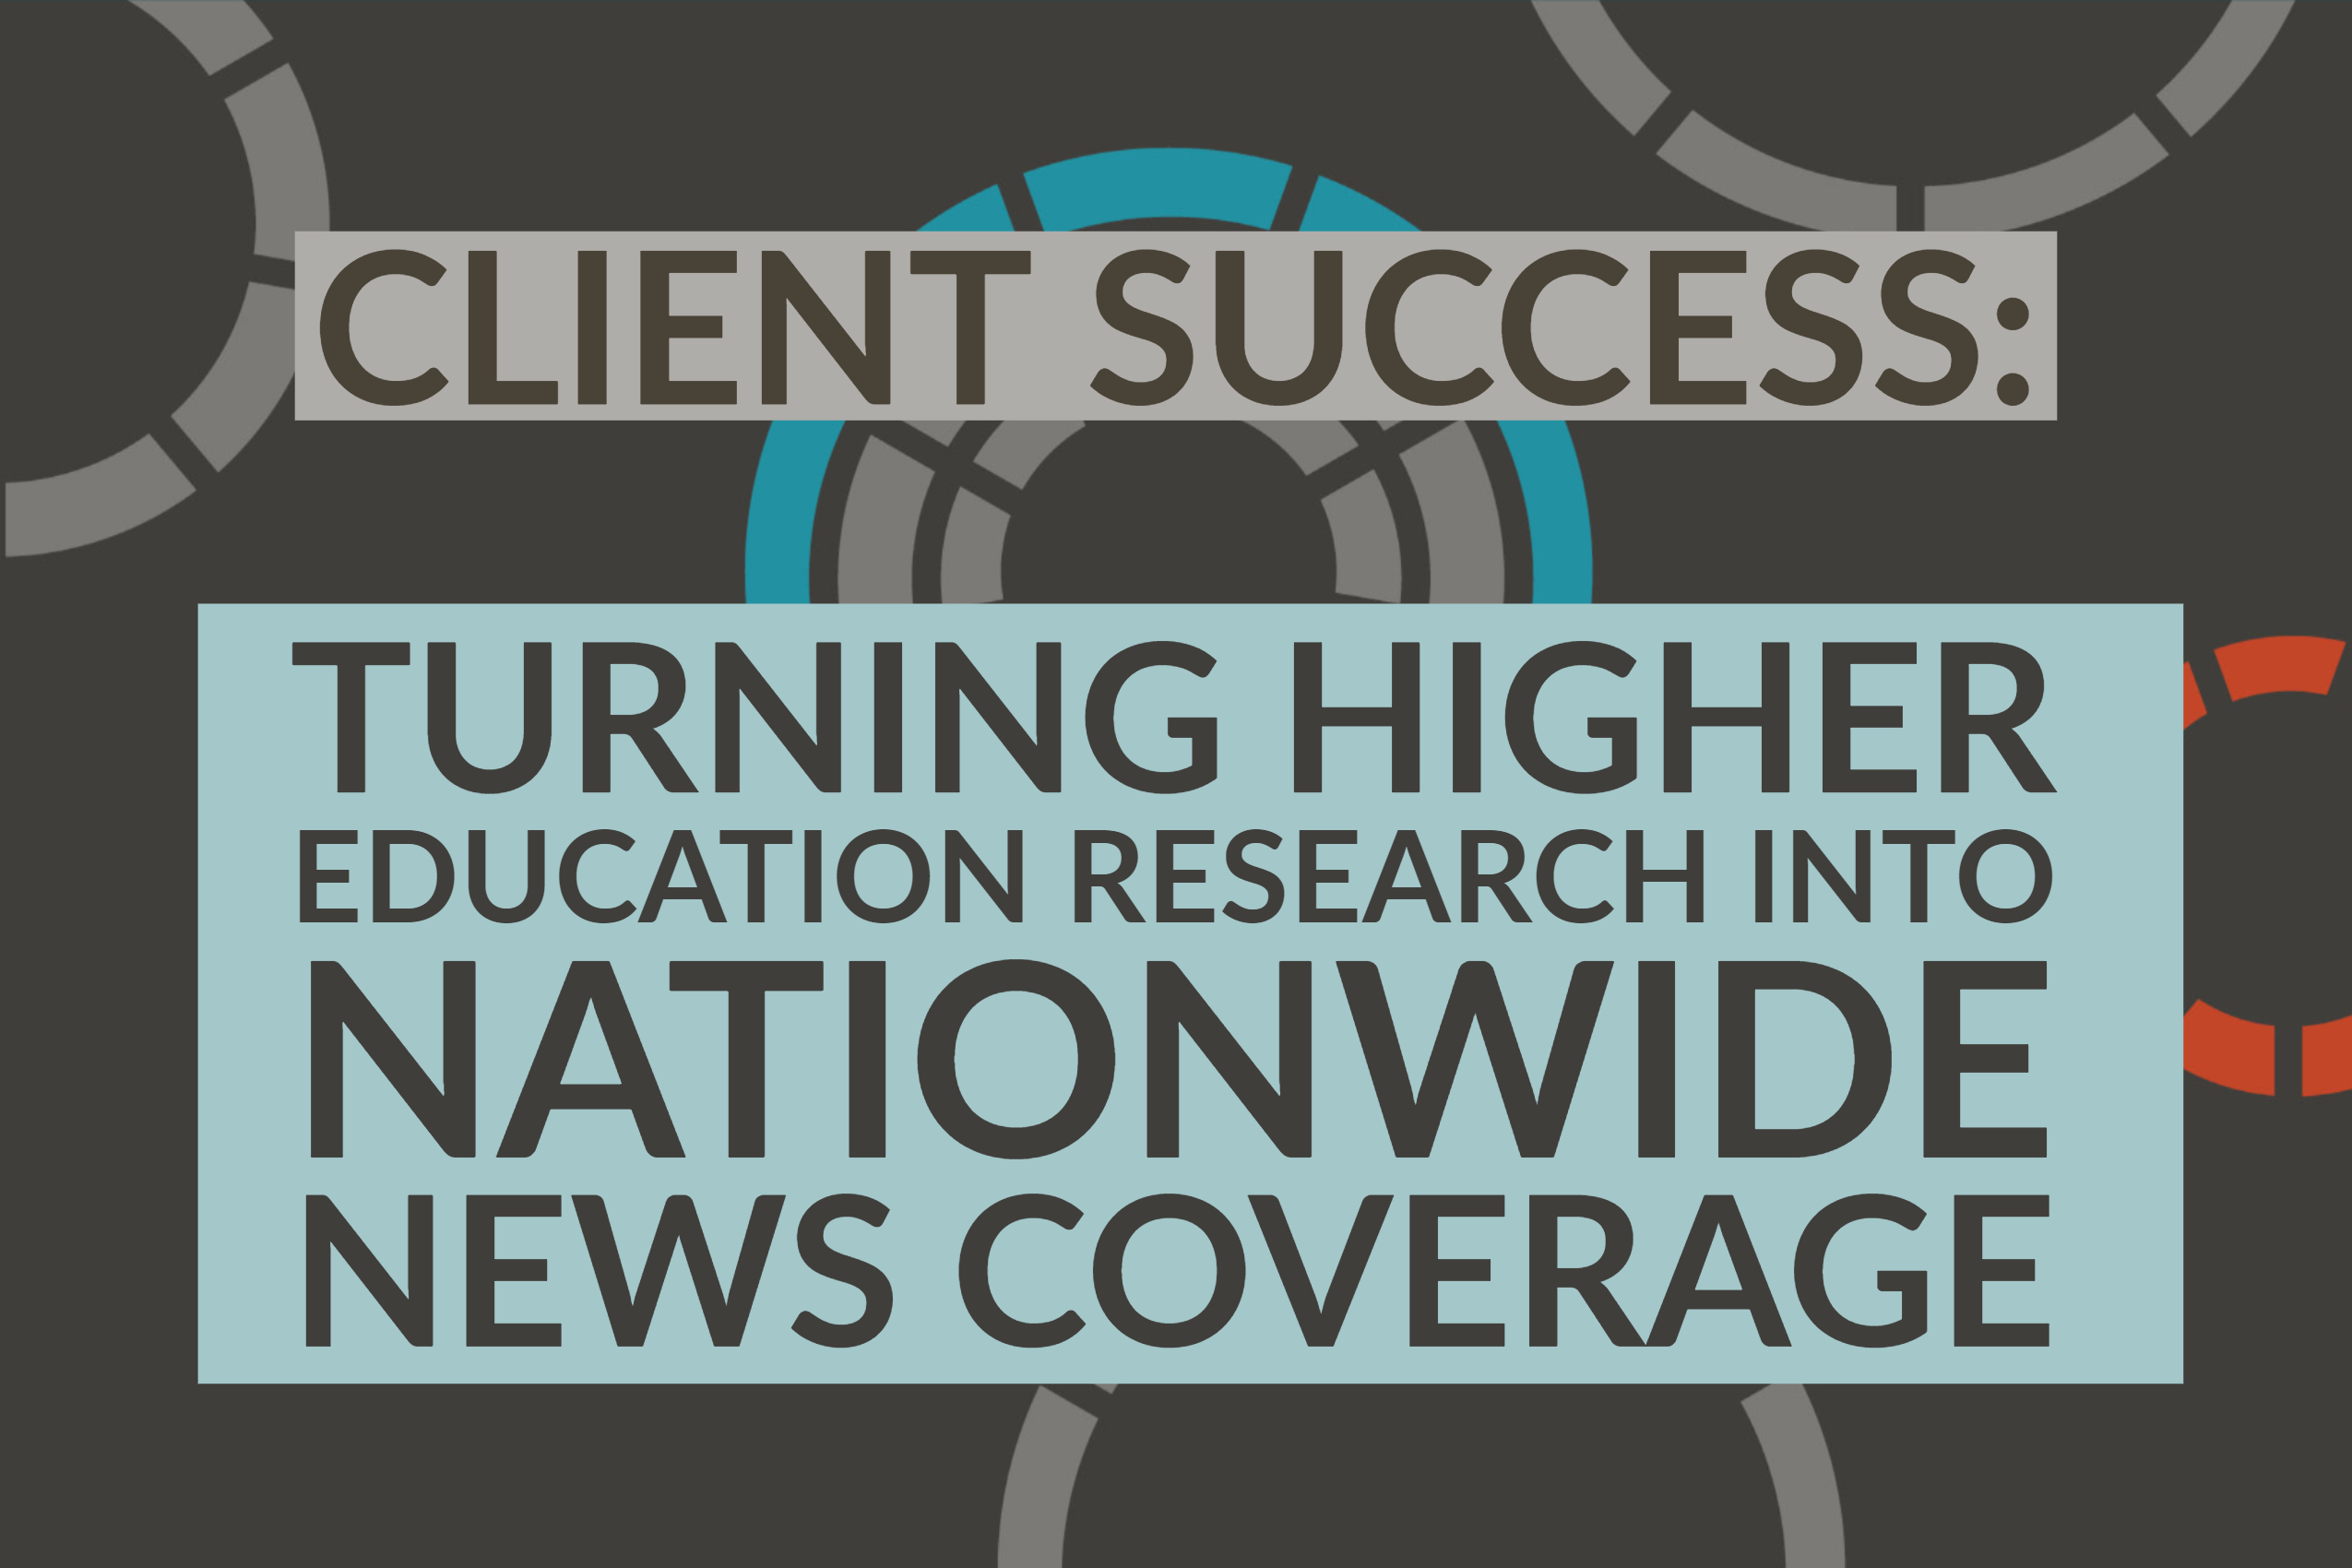 Client Success: Turning Higher Education Research Into Nationwide News Coverage